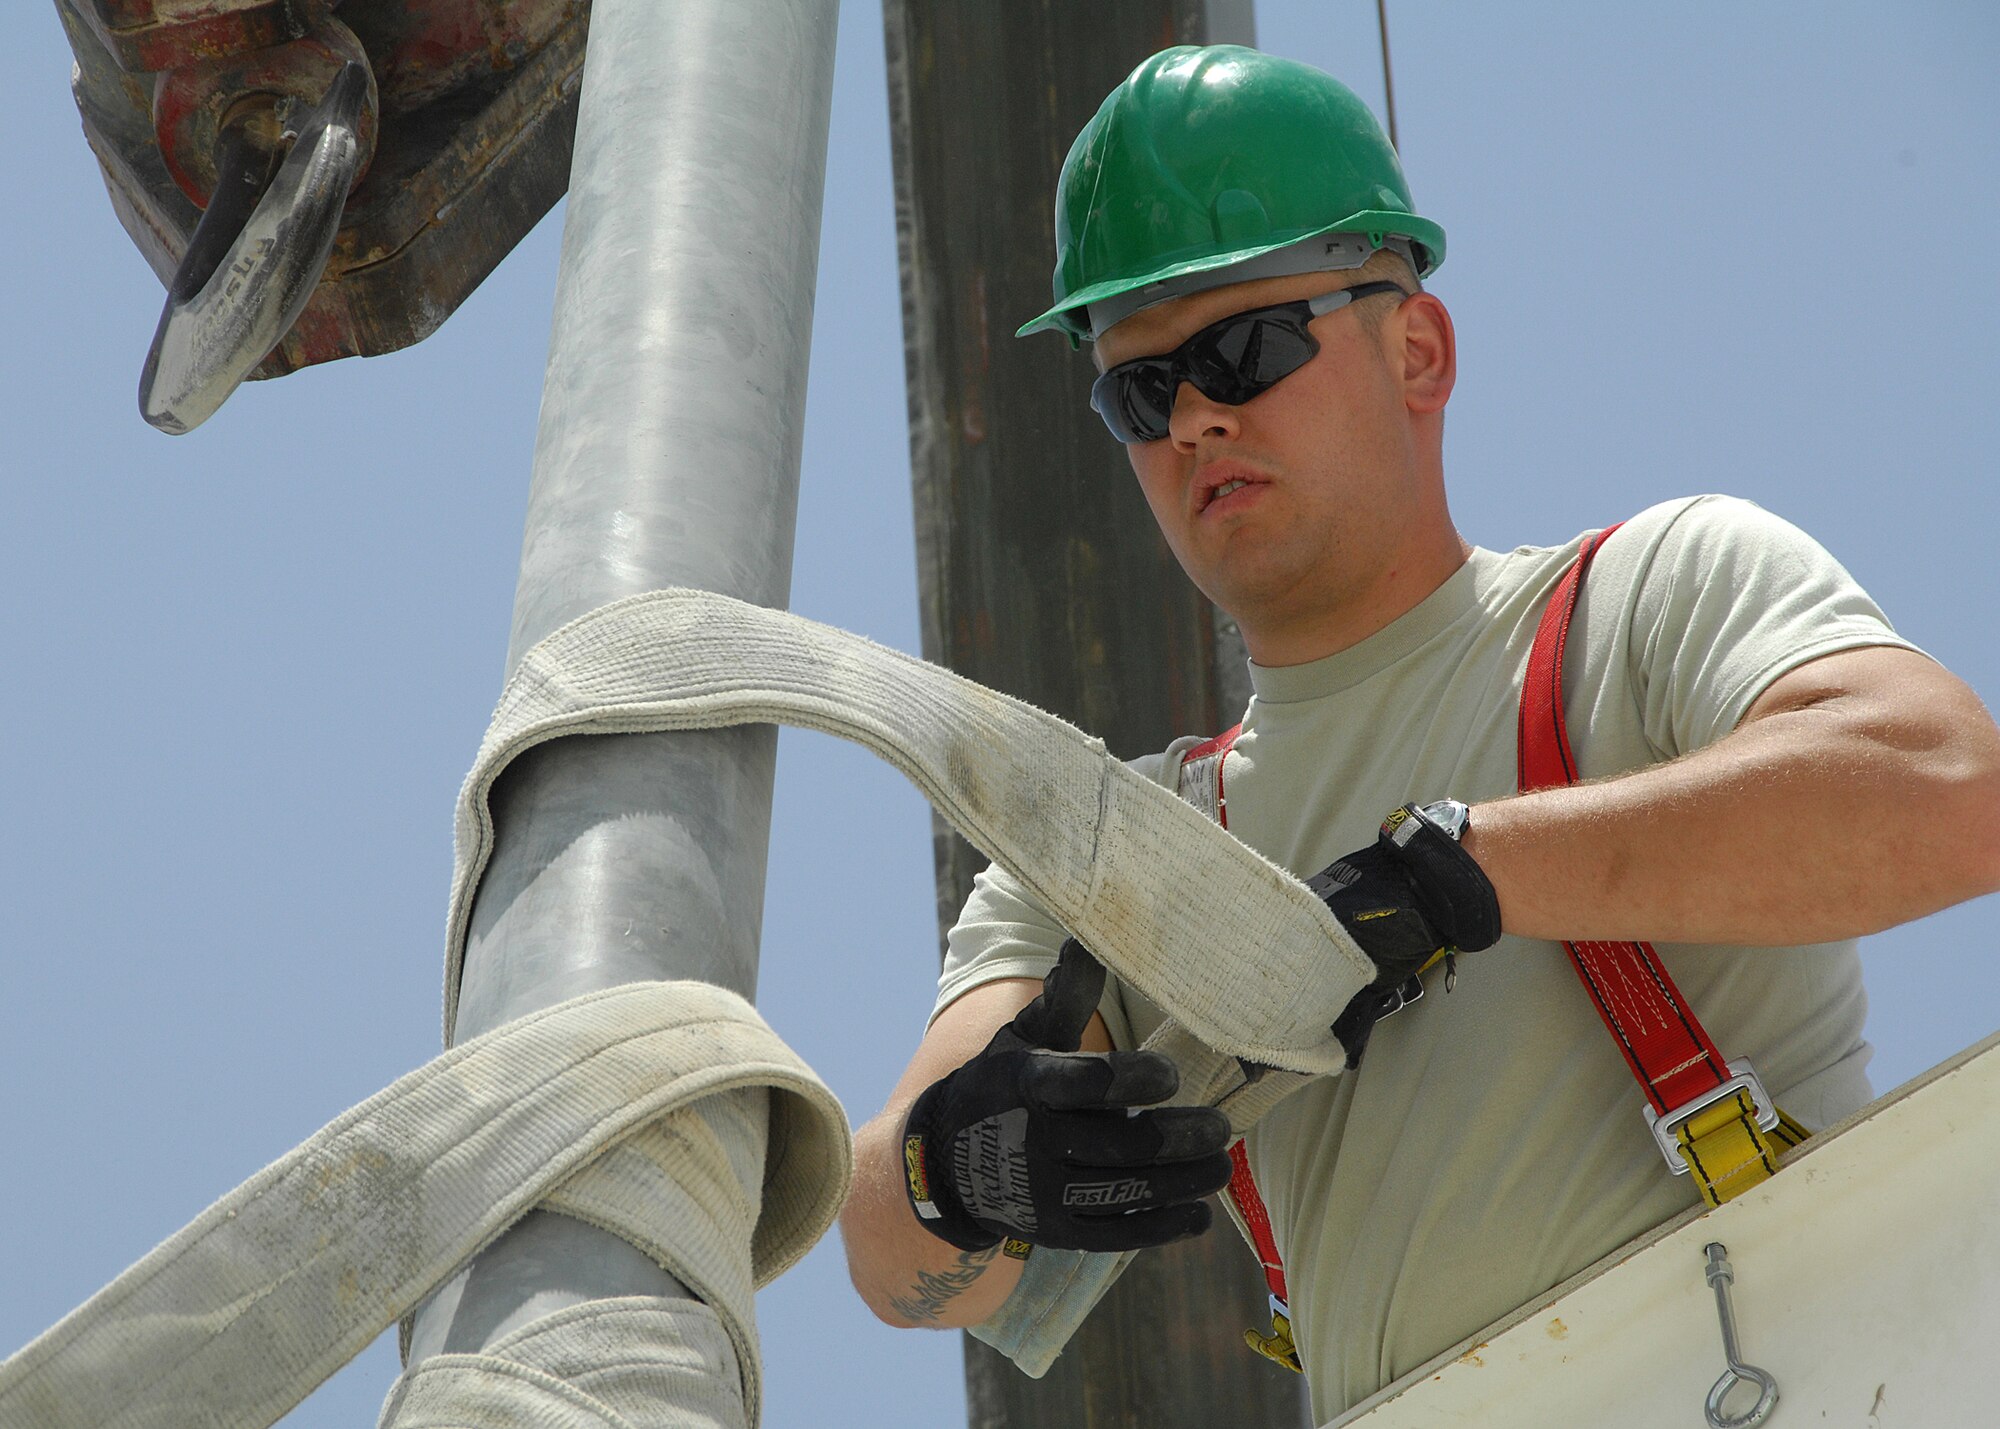 SOUTHWEST ASIA -- Senior Airman Blake Kelsey, assigned to the 386th Expeditionary Civil Engineer Squadron, removes a harness strap from a light pole on Aug. 23 at an air base in Southwest Asia. The 386th ECES installed four new light poles on the Republic of Korea Air Force compound because of previous wind damage to the poles. The installation was a joint effort between U.S. and Korean Airmen. Airman Kelsey is deployed from the Utah Air National Guard. (U.S. Air Force photo/Tech. Sgt. Raheem Moore)